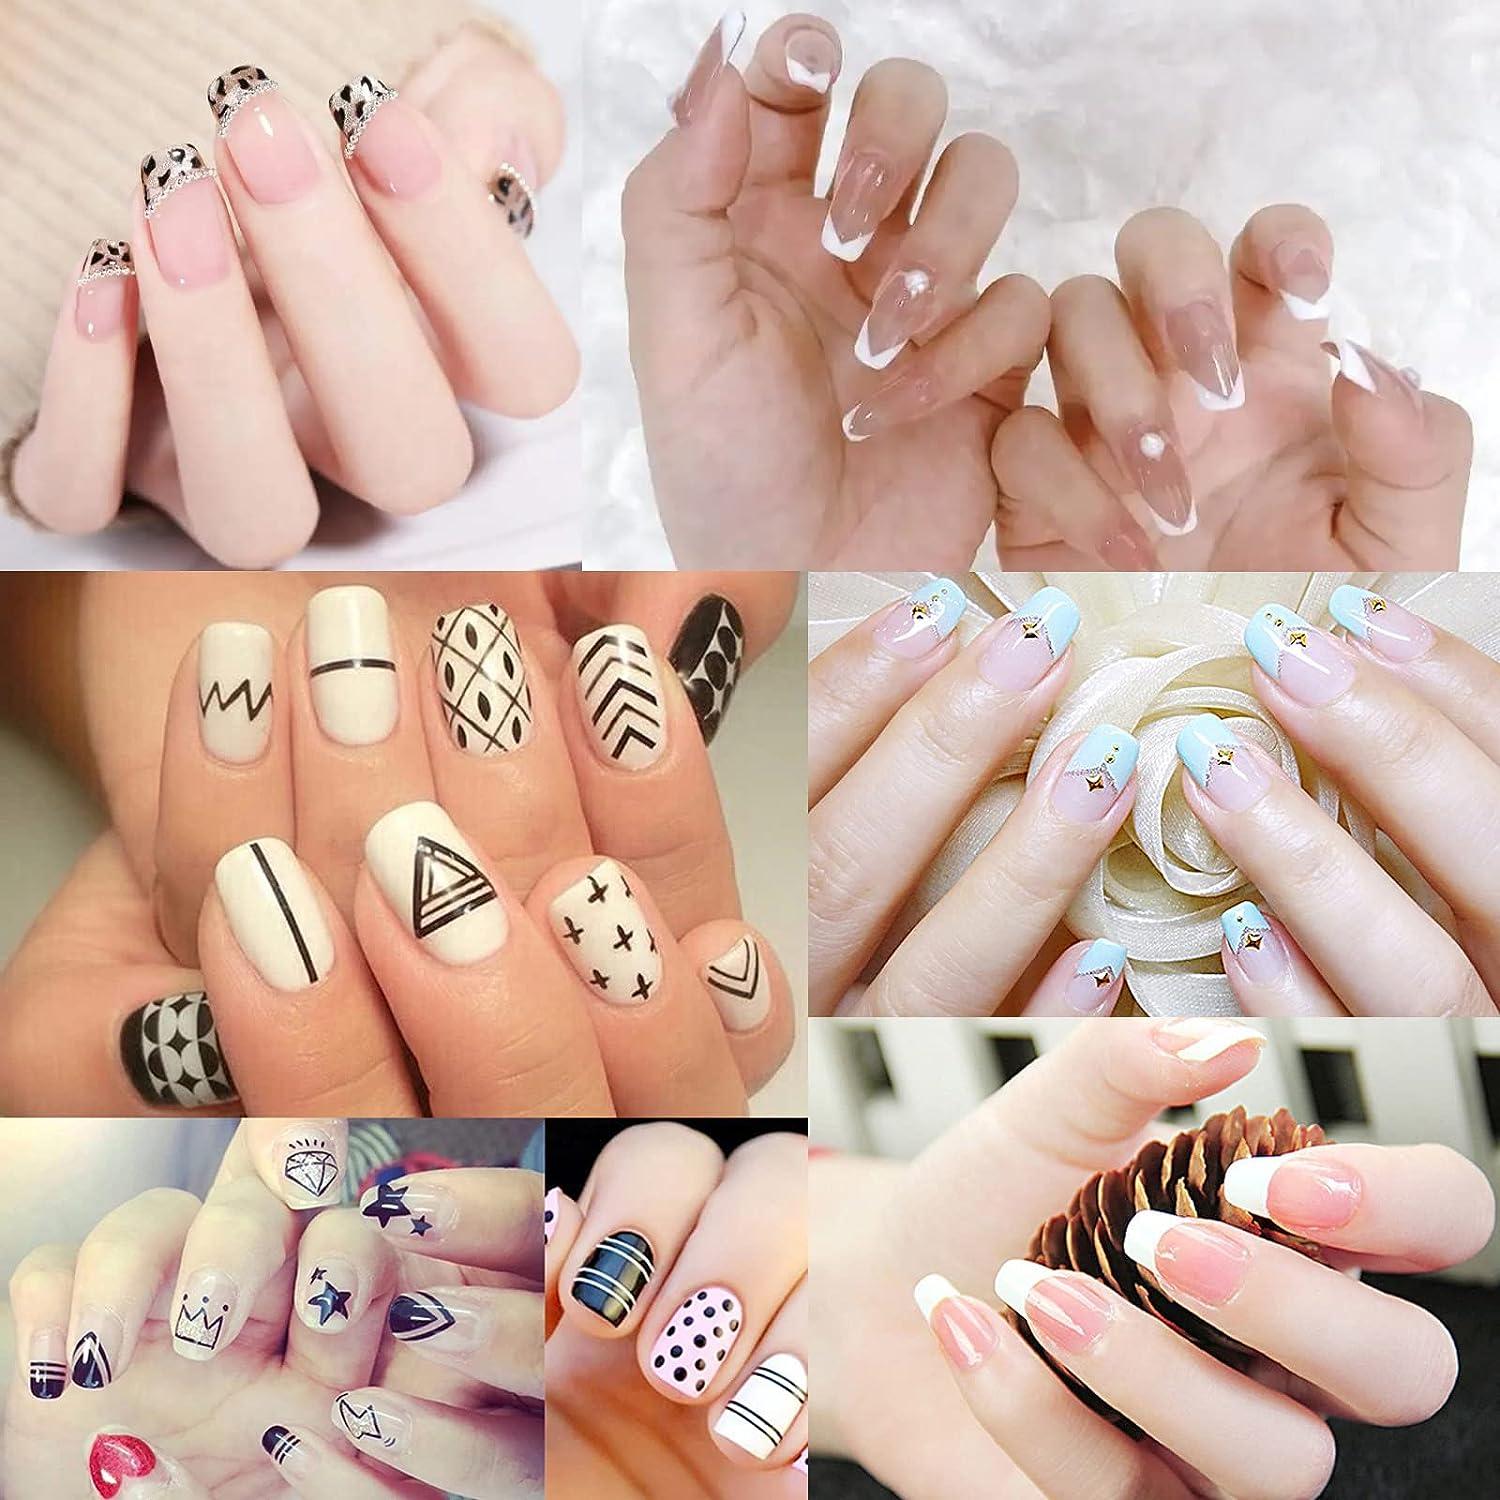 3 Designs French Manicure Nail Art Stickers, Self-Adhesive Nail Tips Guides  for DIY Decoration Stencil Tools (3 Moon Shape Design, 36 Sheets) - China  Designs and Nail Art Stickers price